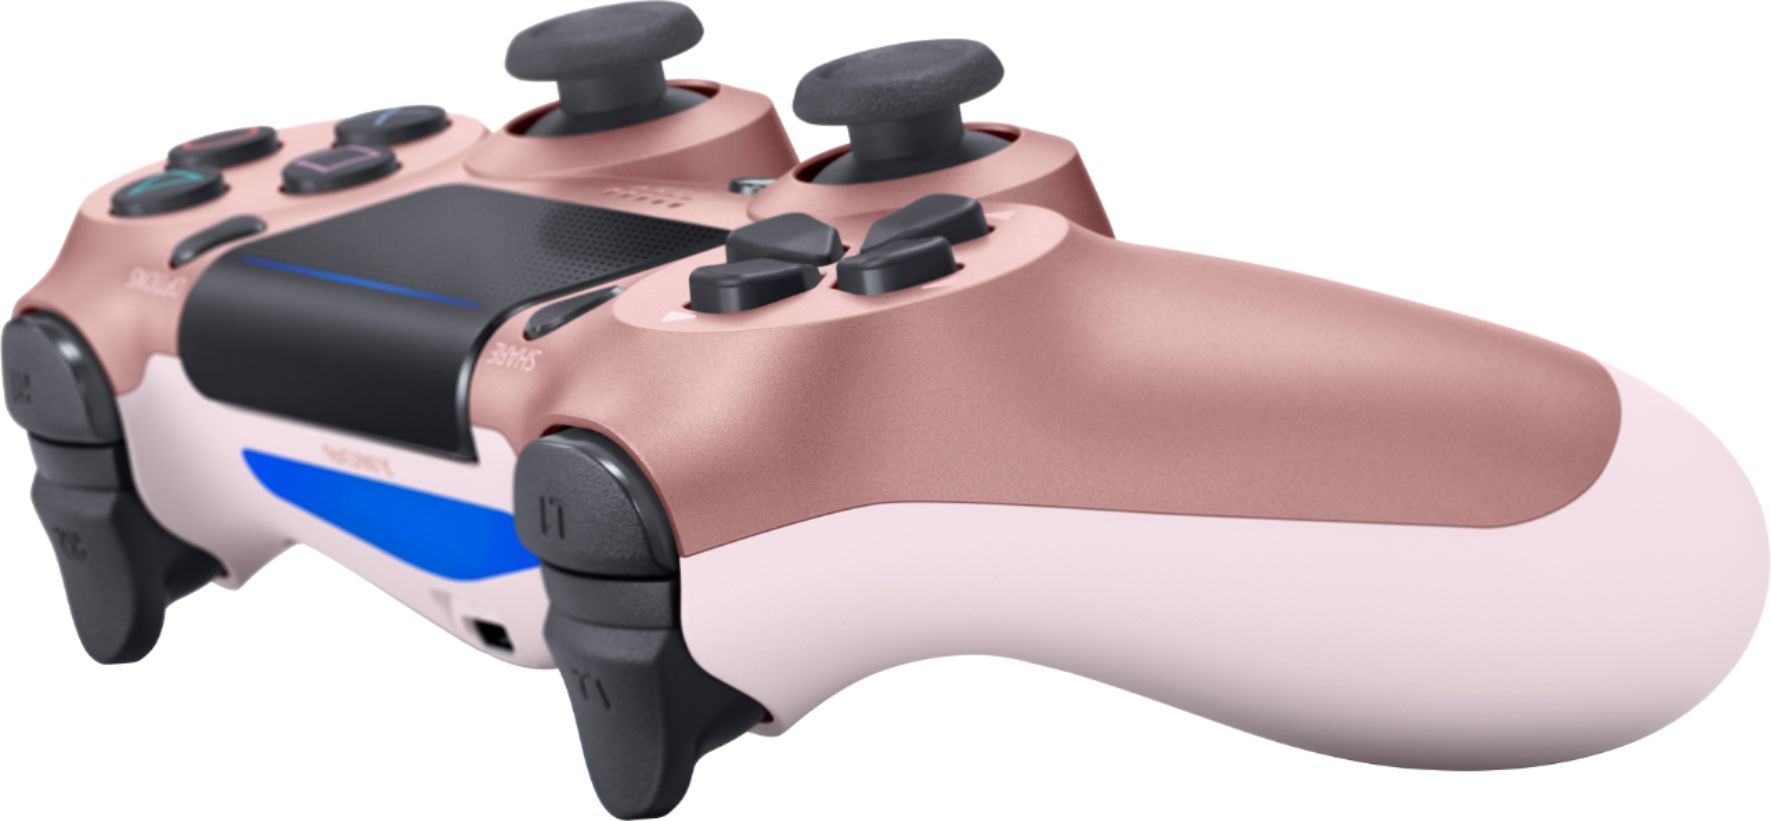 session instructor Pacific Islands Best Buy: DualShock 4 Wireless Controller for Sony PlayStation 4 Rose Gold  3004142